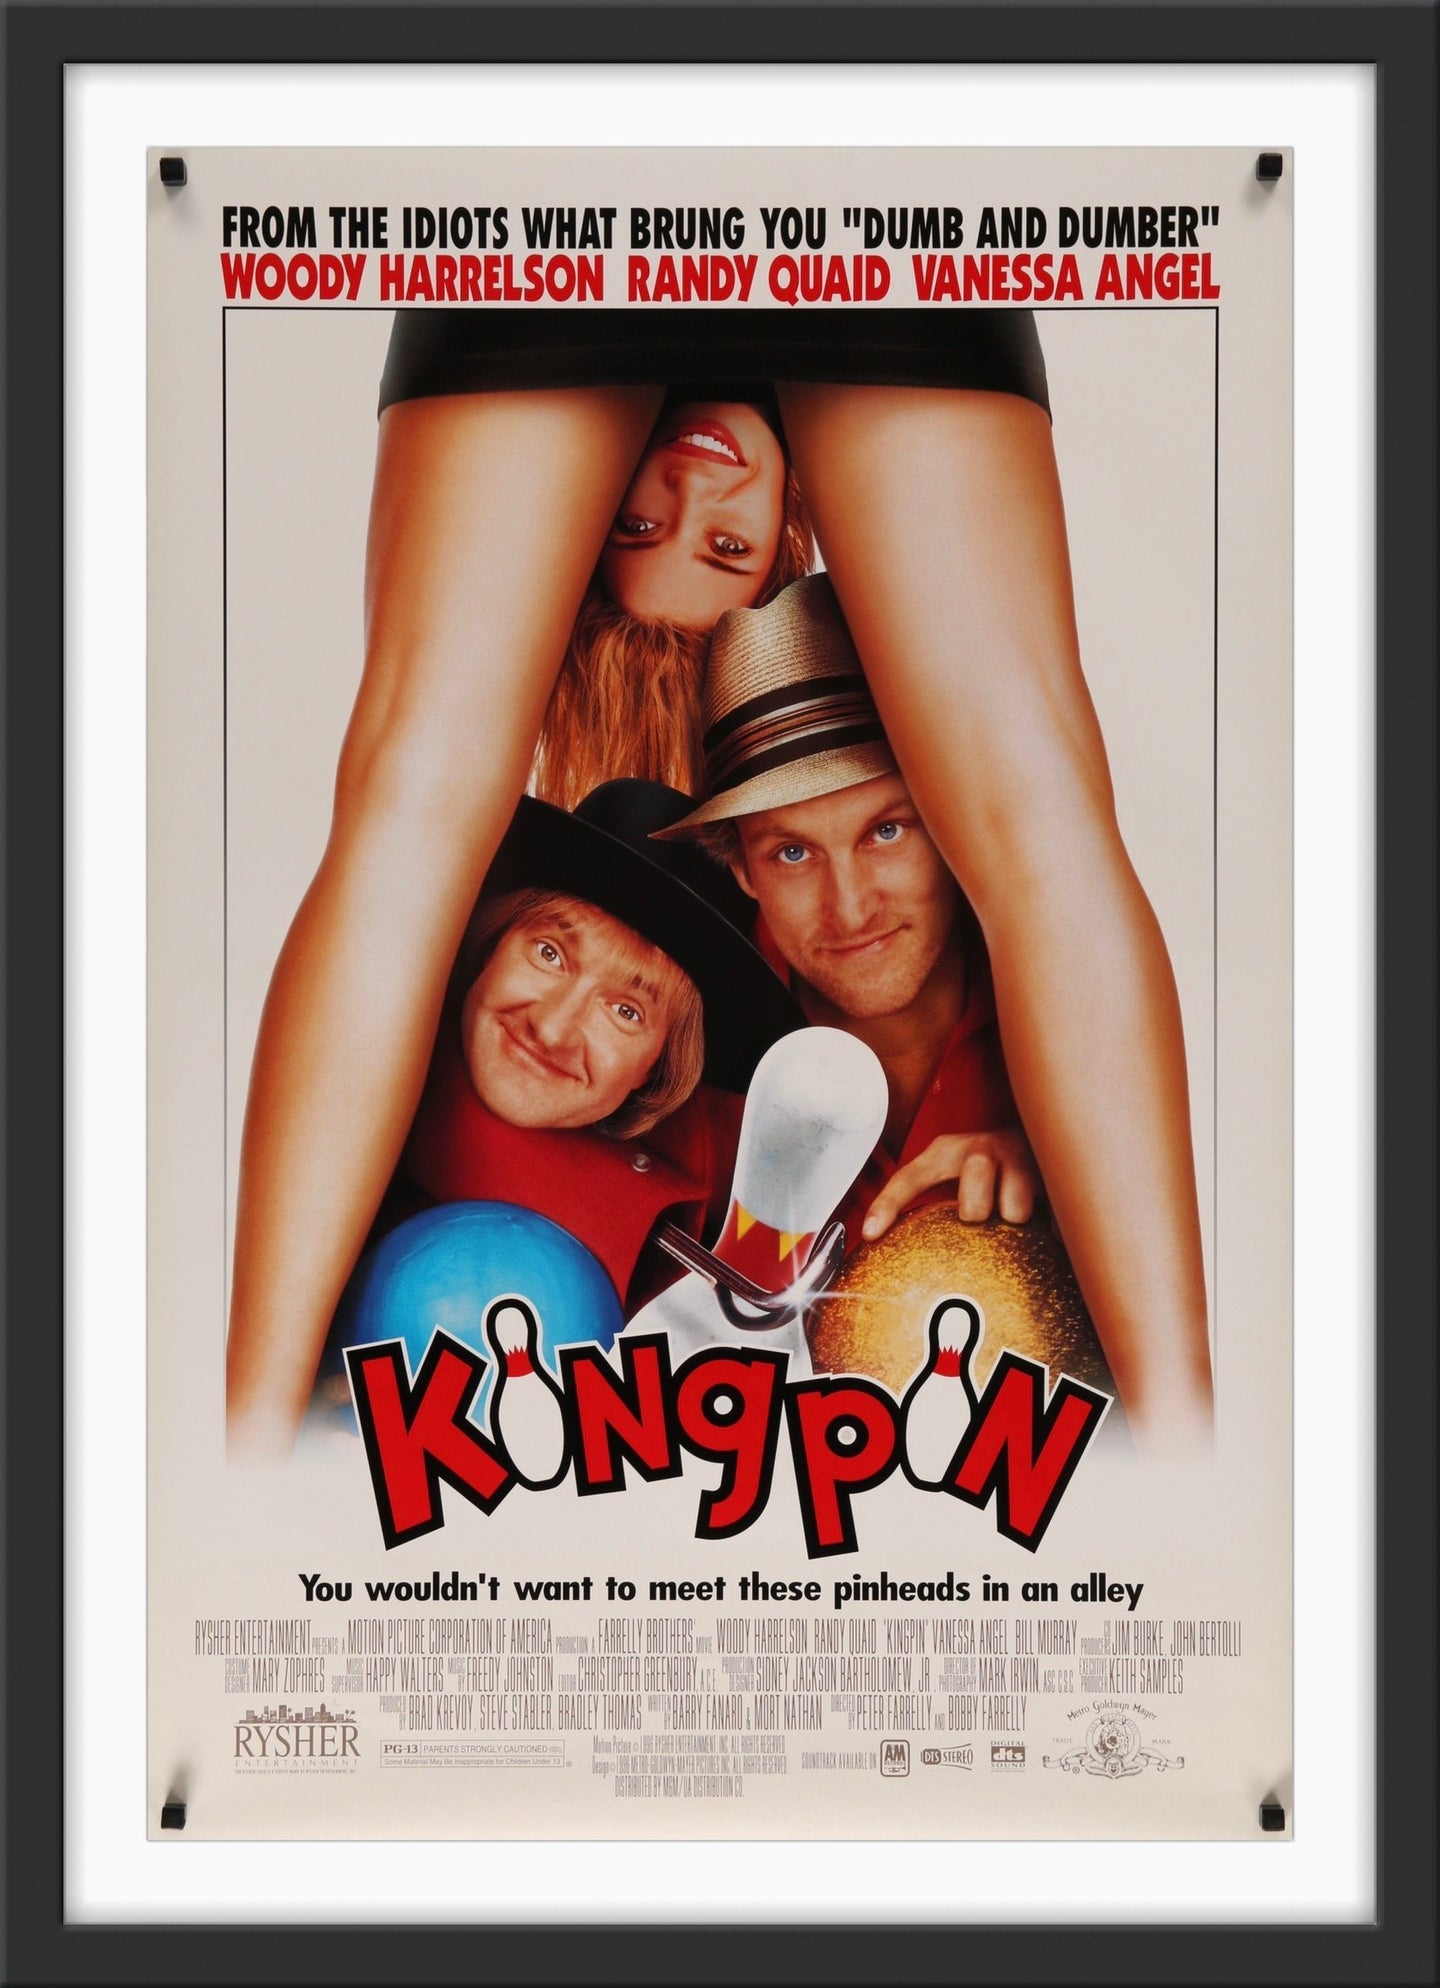 An original movie poster for the Farrelly Brothers comedy film Kingpin